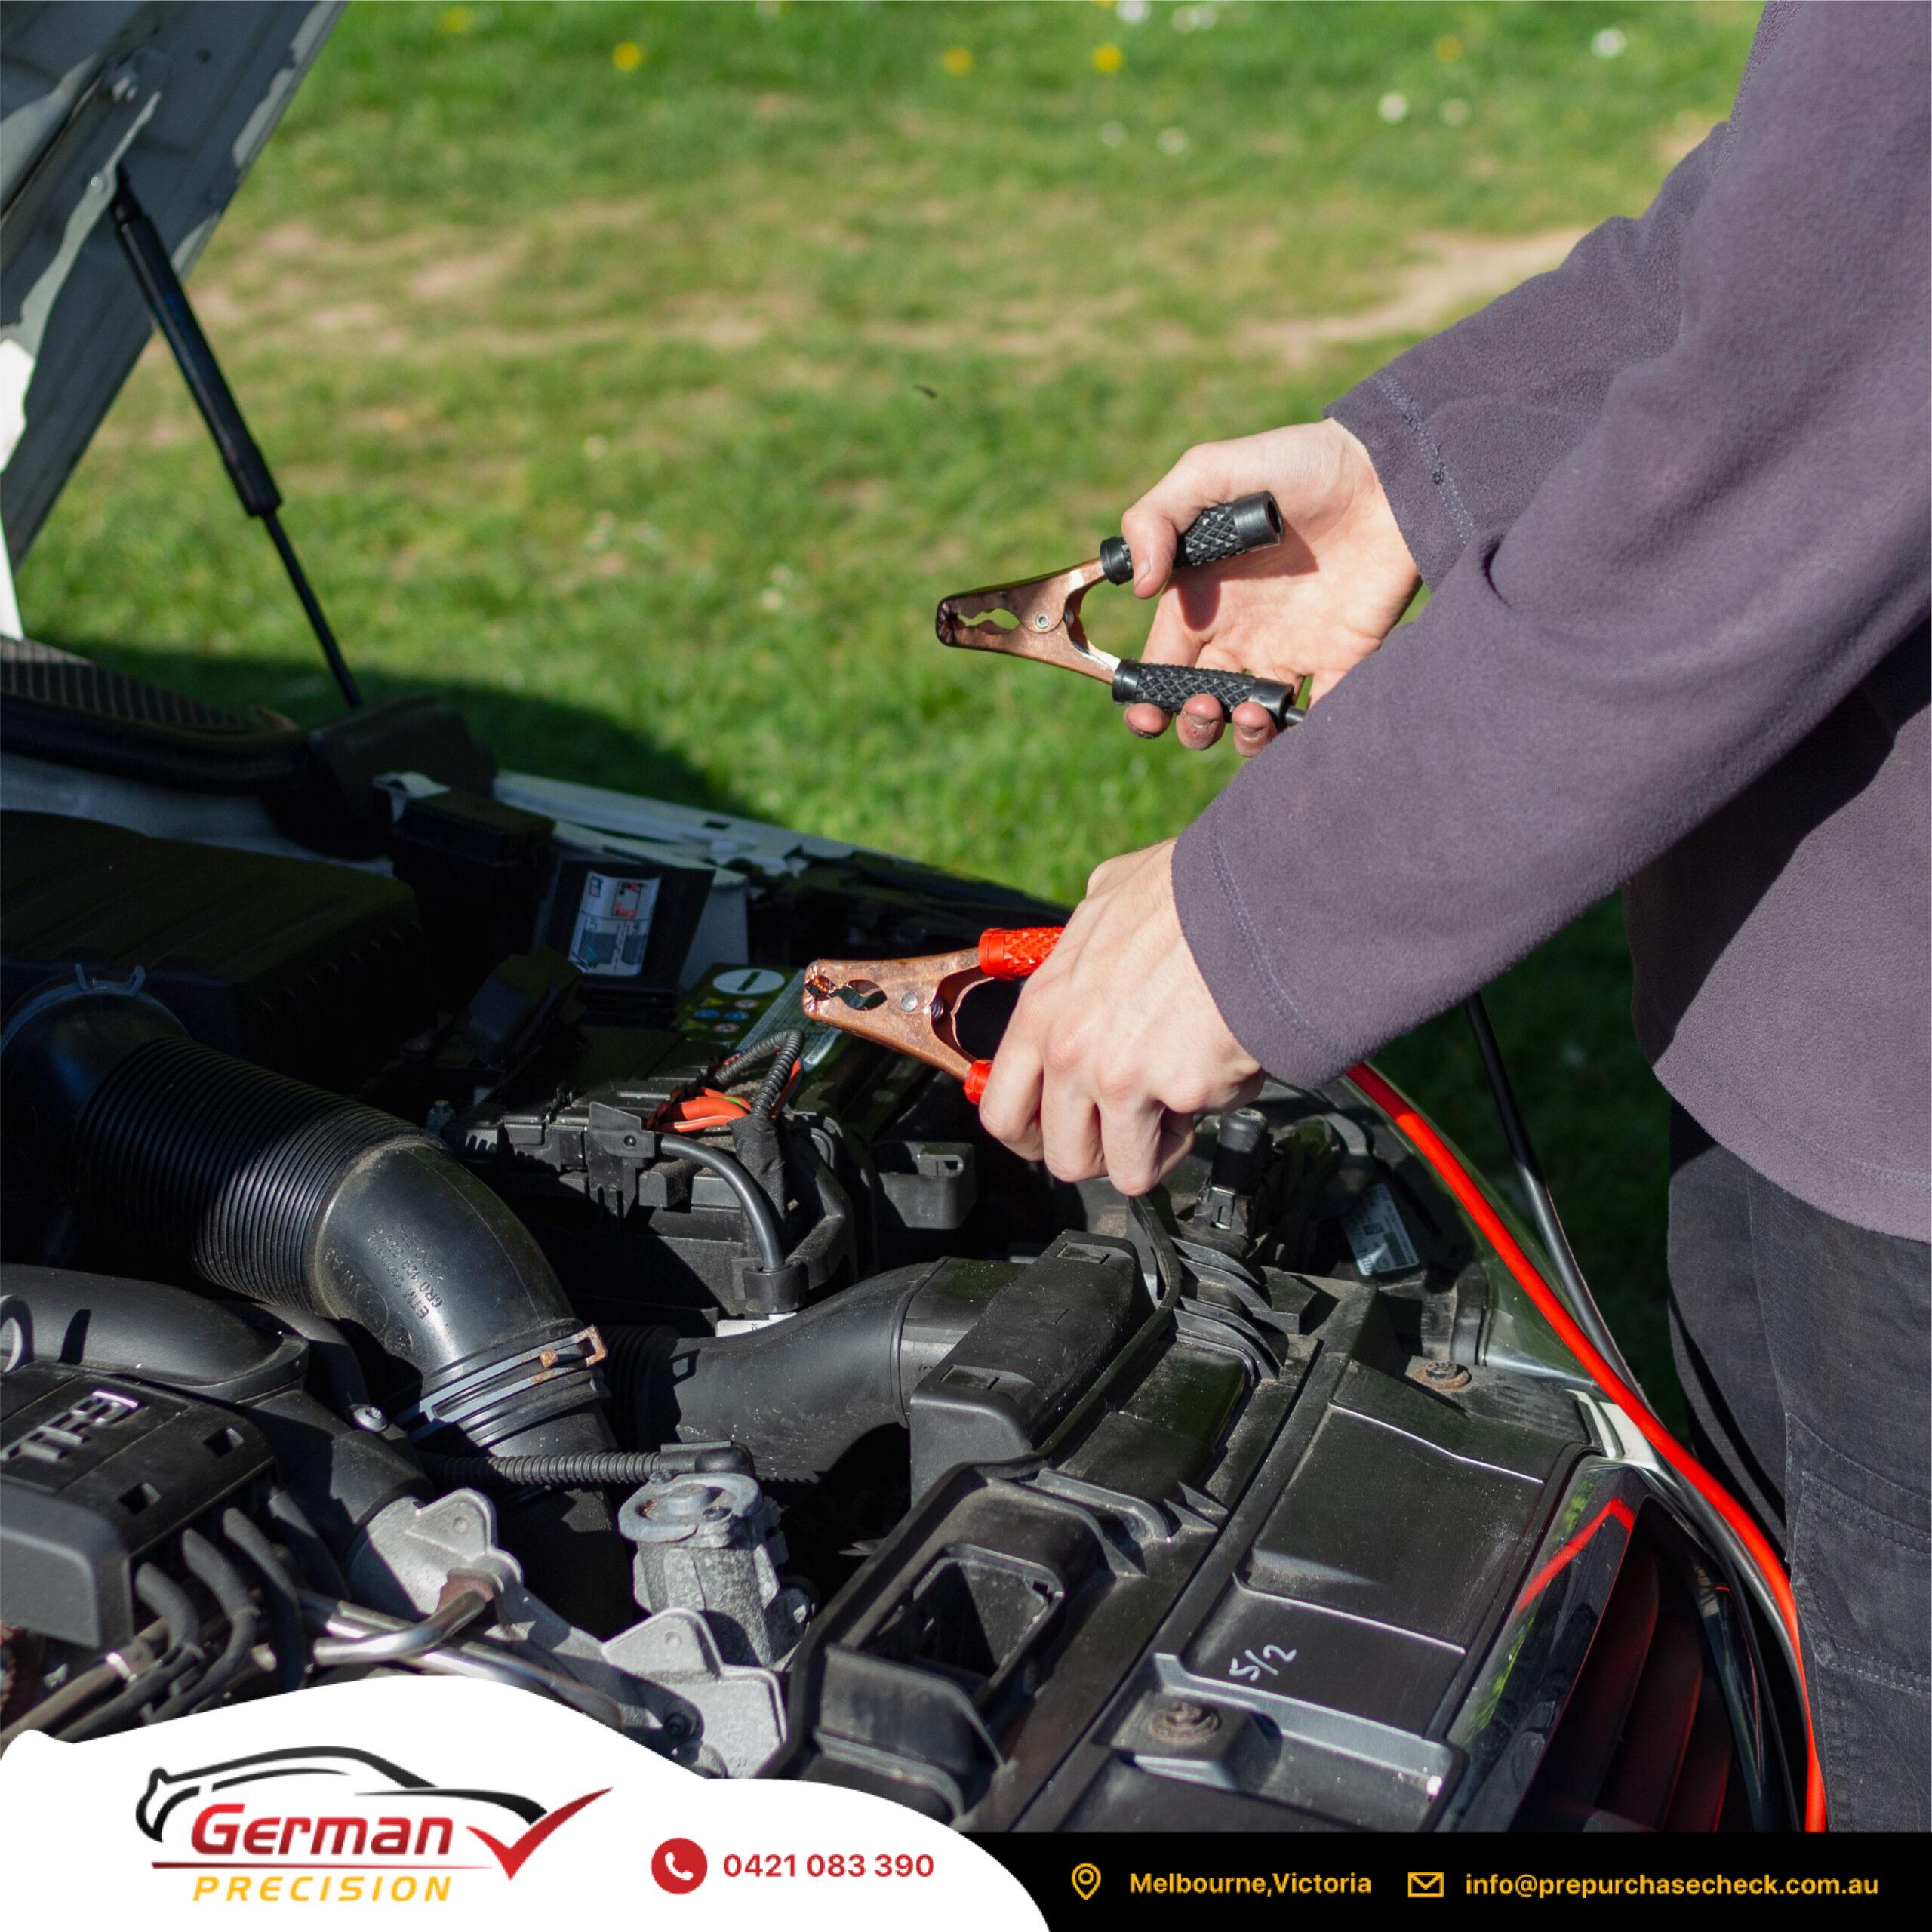 A guide on car battery replacement and maintenance